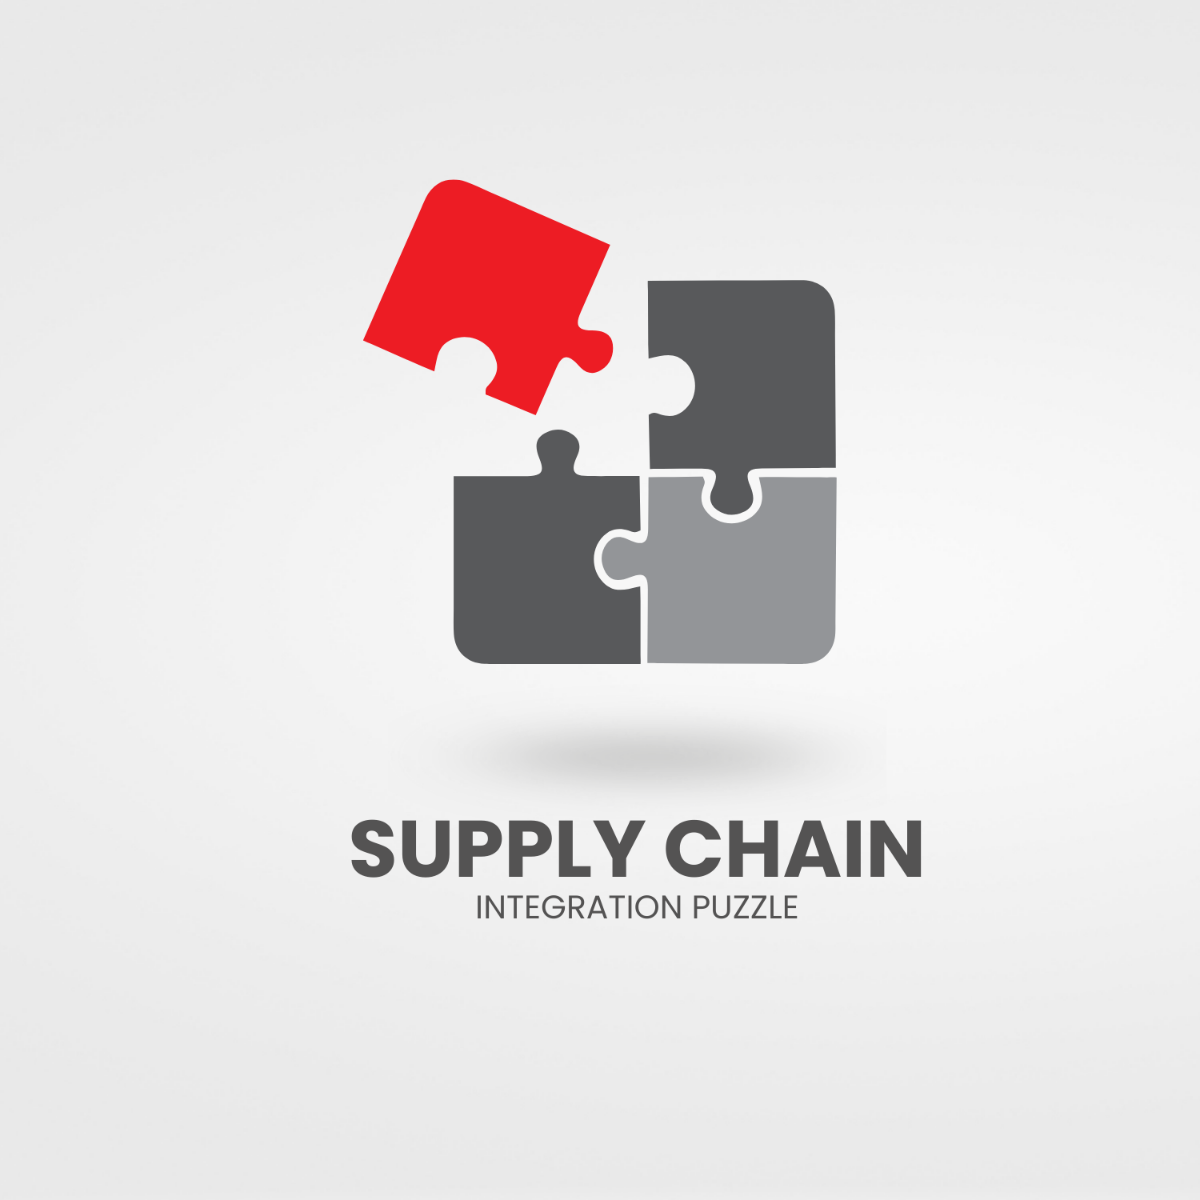 Supply Chain Integration Puzzle Logo Template